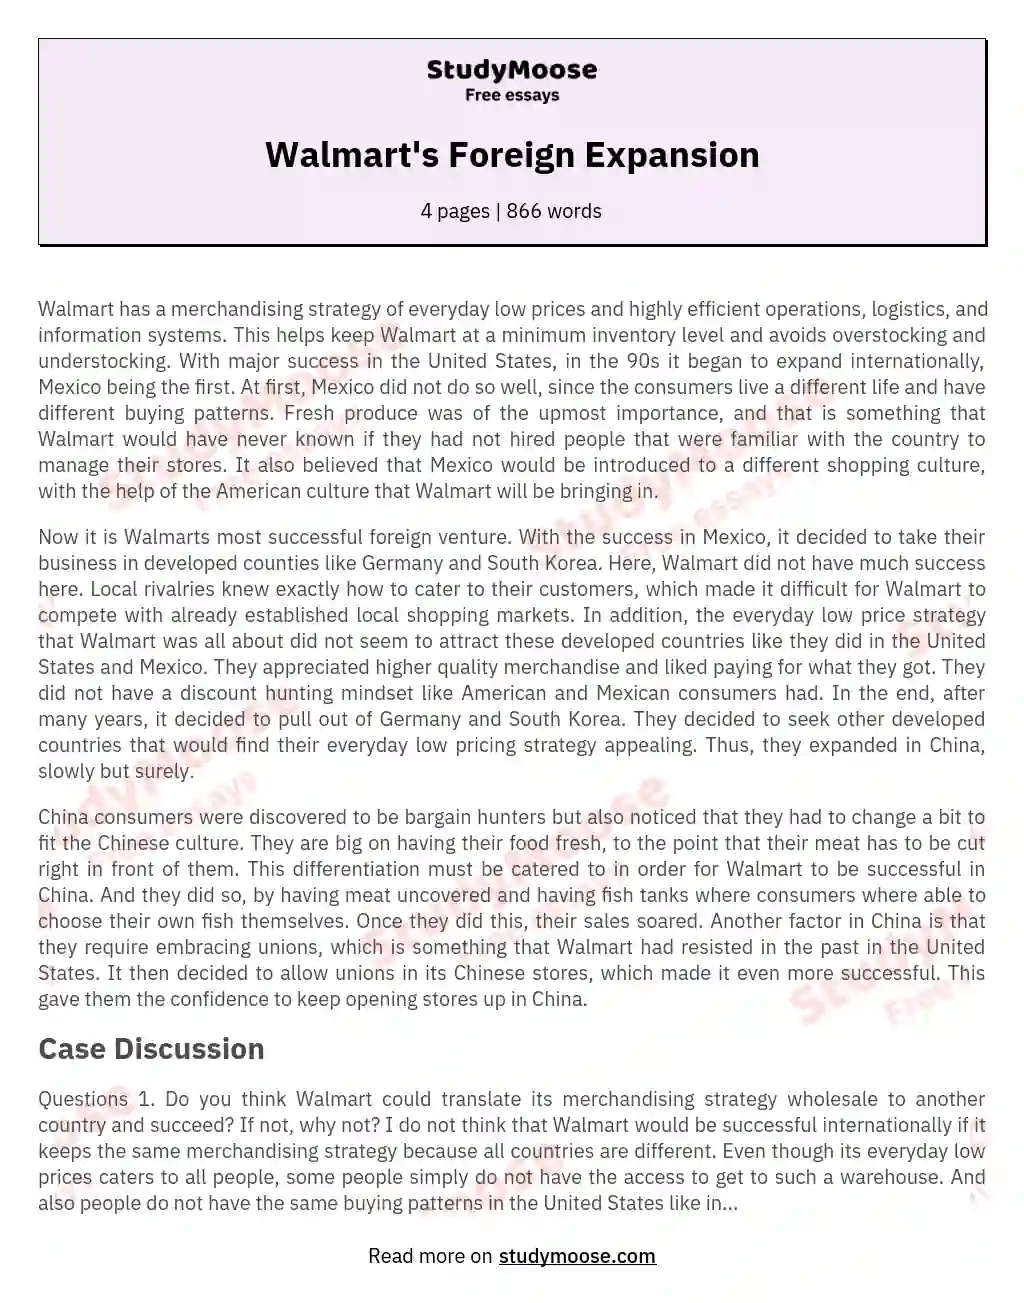 Walmart's Foreign Expansion essay